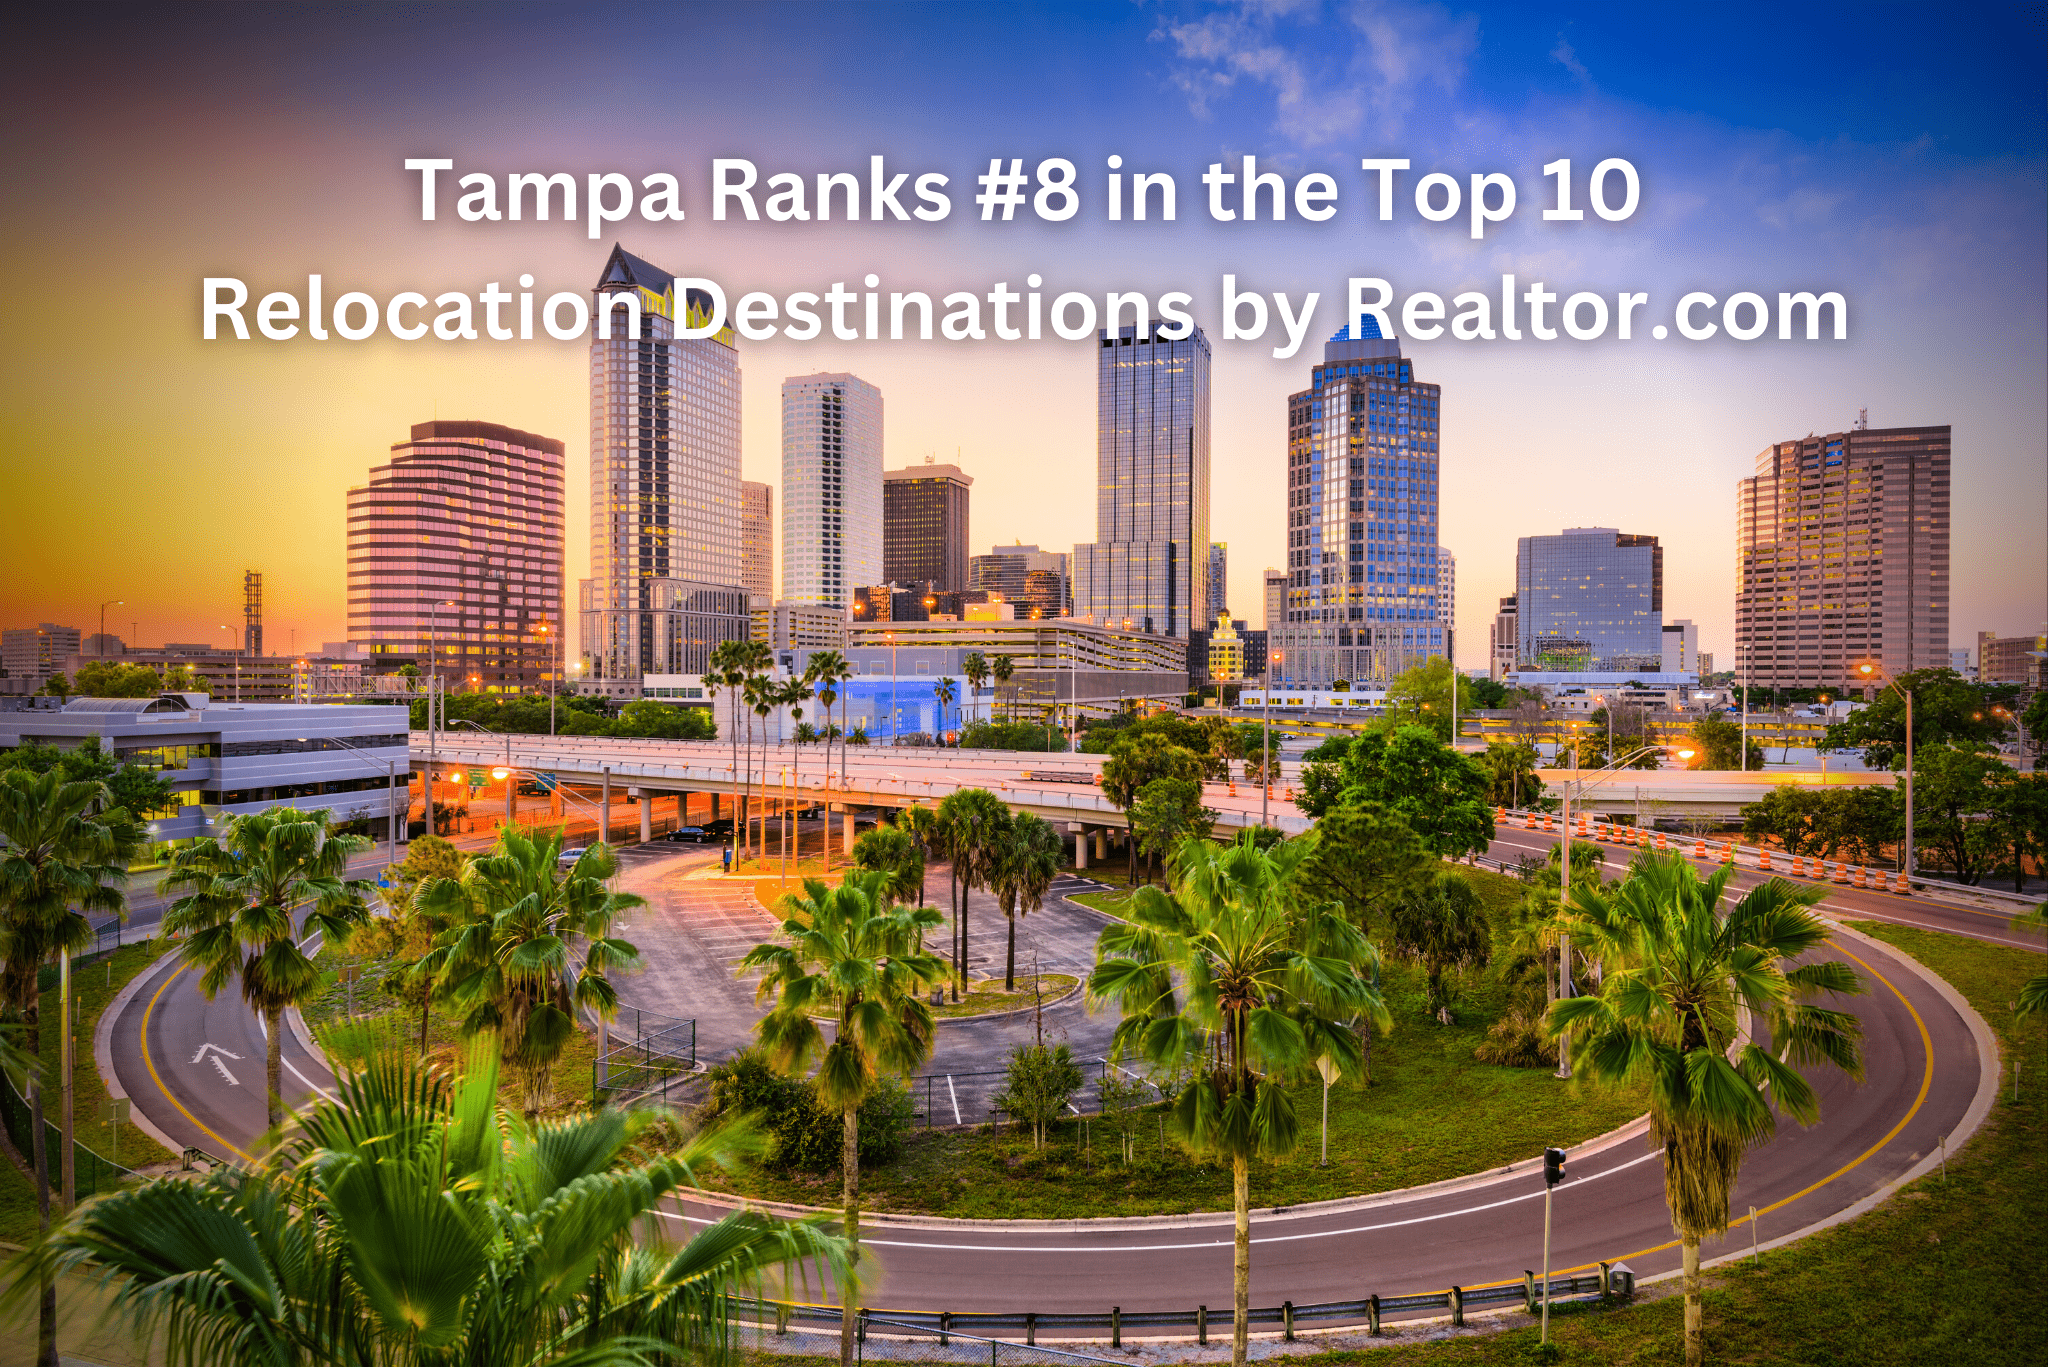 Tampa Ranks in the Top 10 Relocation Destinations - Tampa ranks 8 of 10